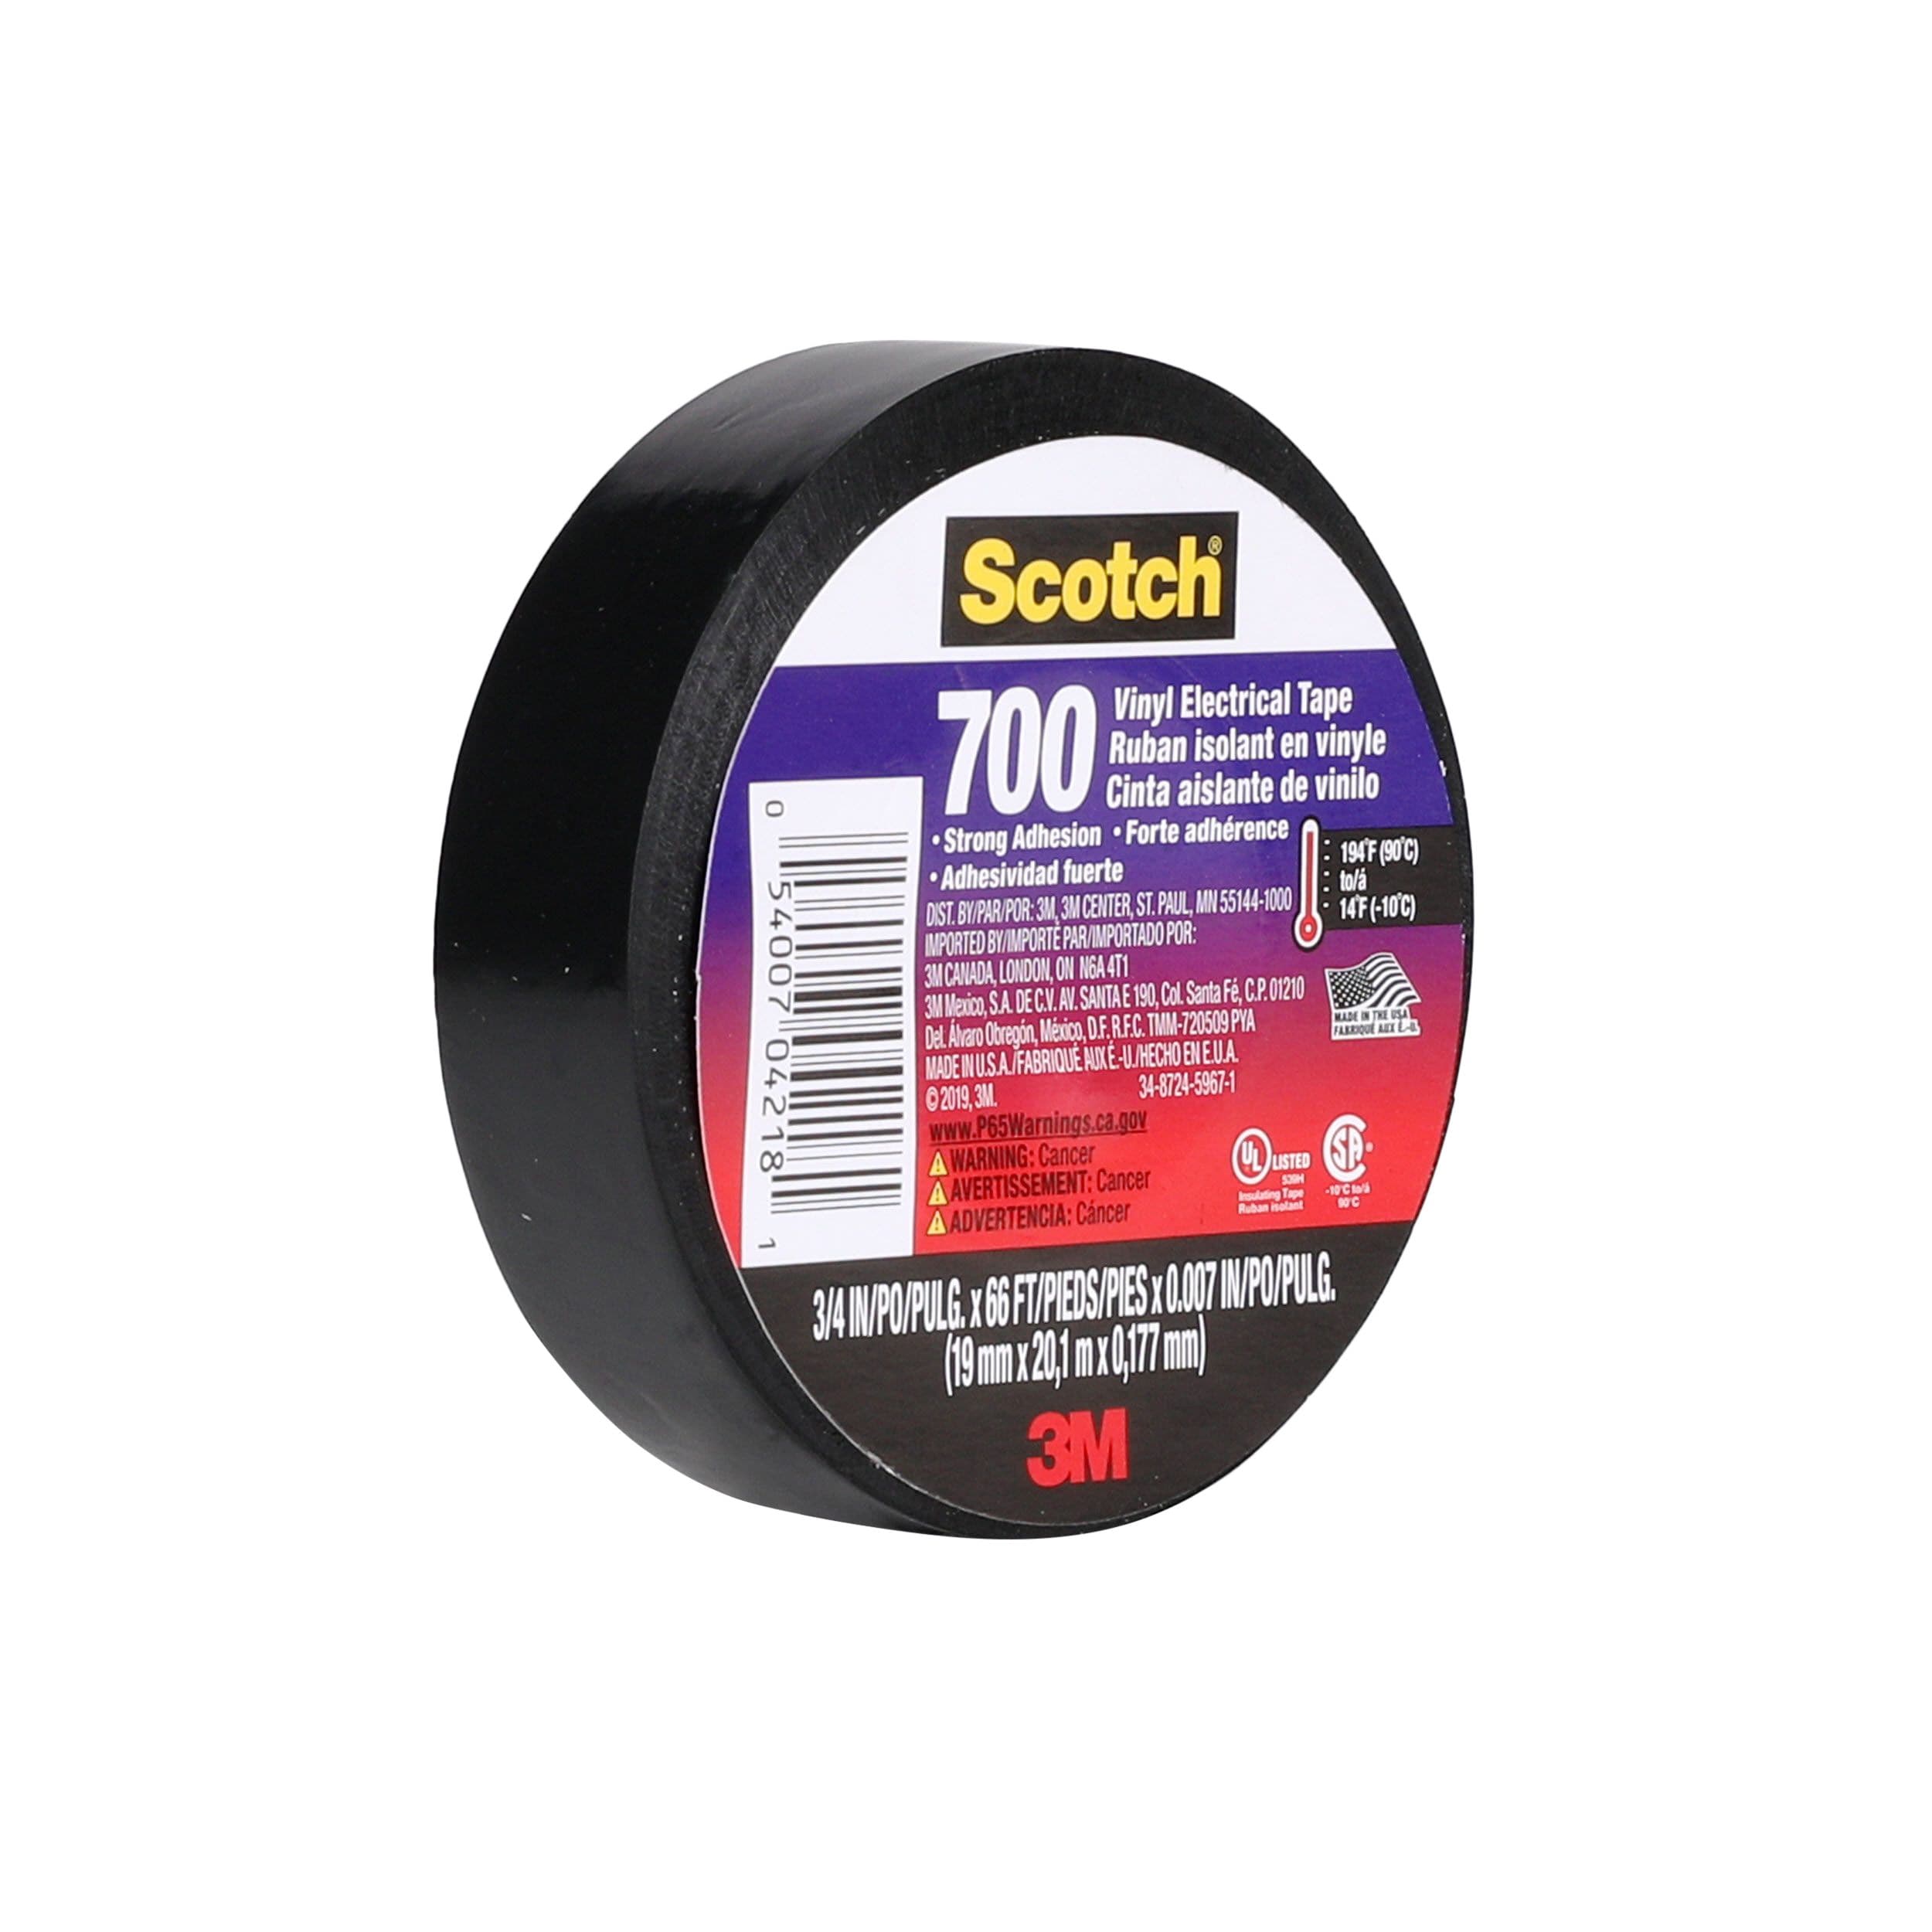 3M Scotch 700 Vinyl Electrical Tape 3/4-in by 66-ft 7 Mils Black Strong Adhesion 